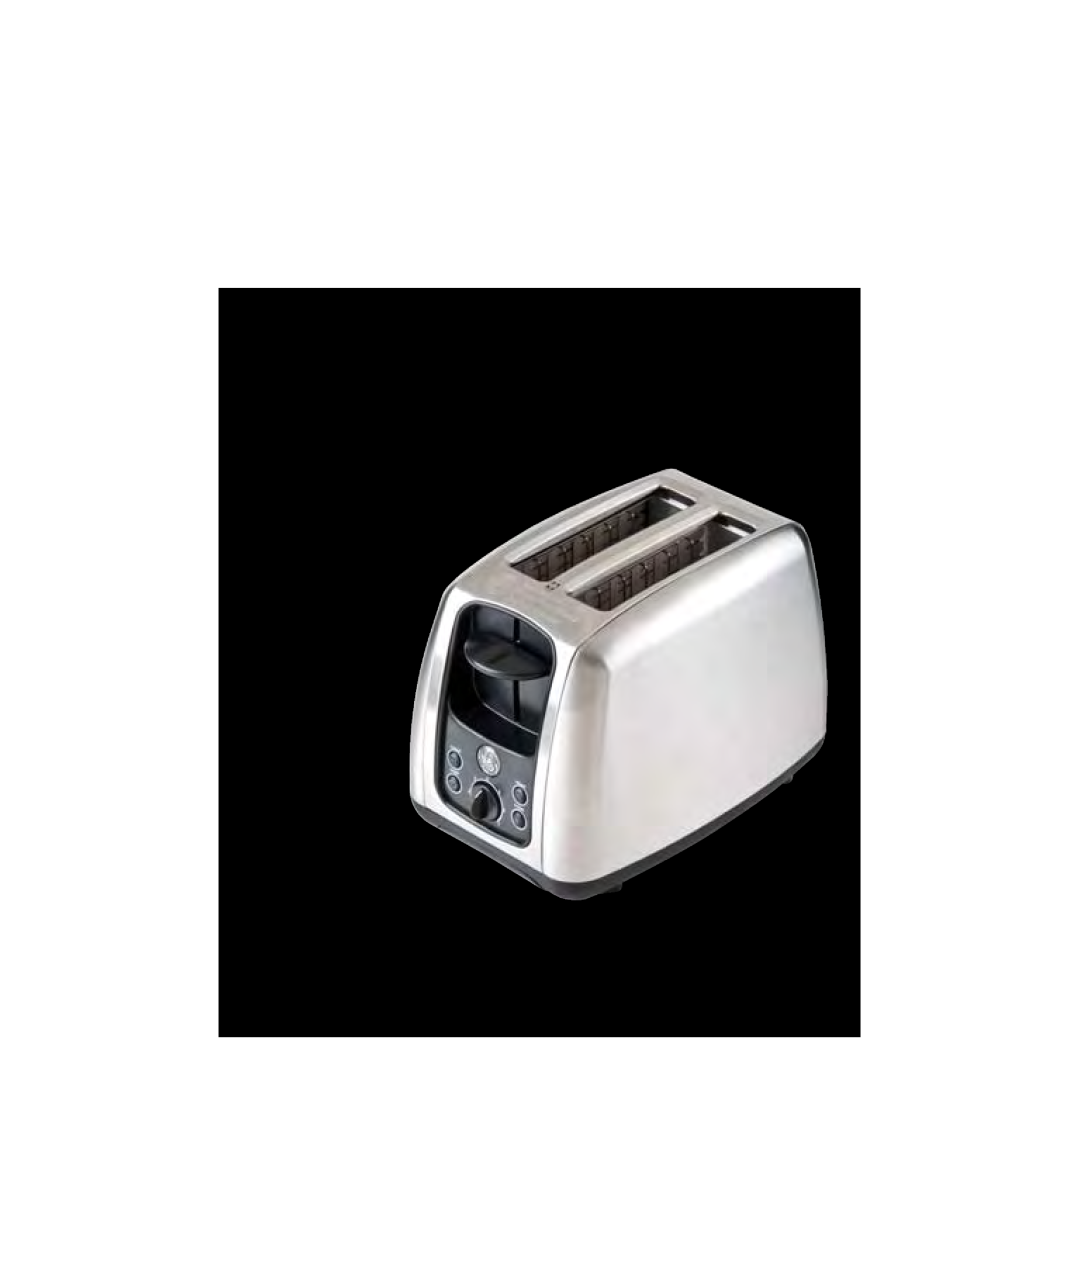 GE 681131692106 manual Customer Assistance 1 877 207 0923 US, Thank you for purchasing a small GE appliance, Slice Toaster 